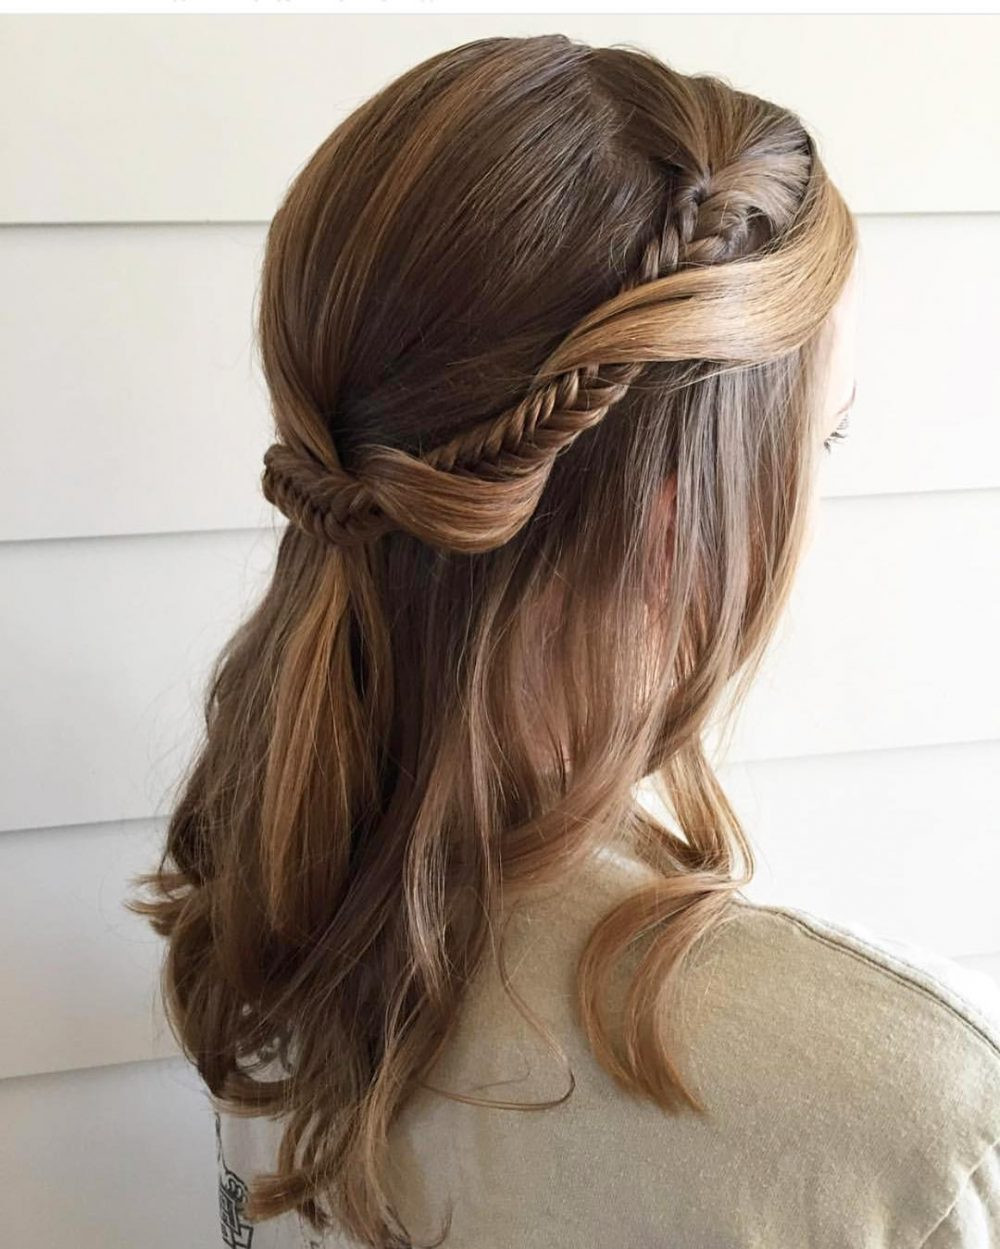 DIY Long Hair Updo
 33 Ridiculously Easy DIY Chic Updos